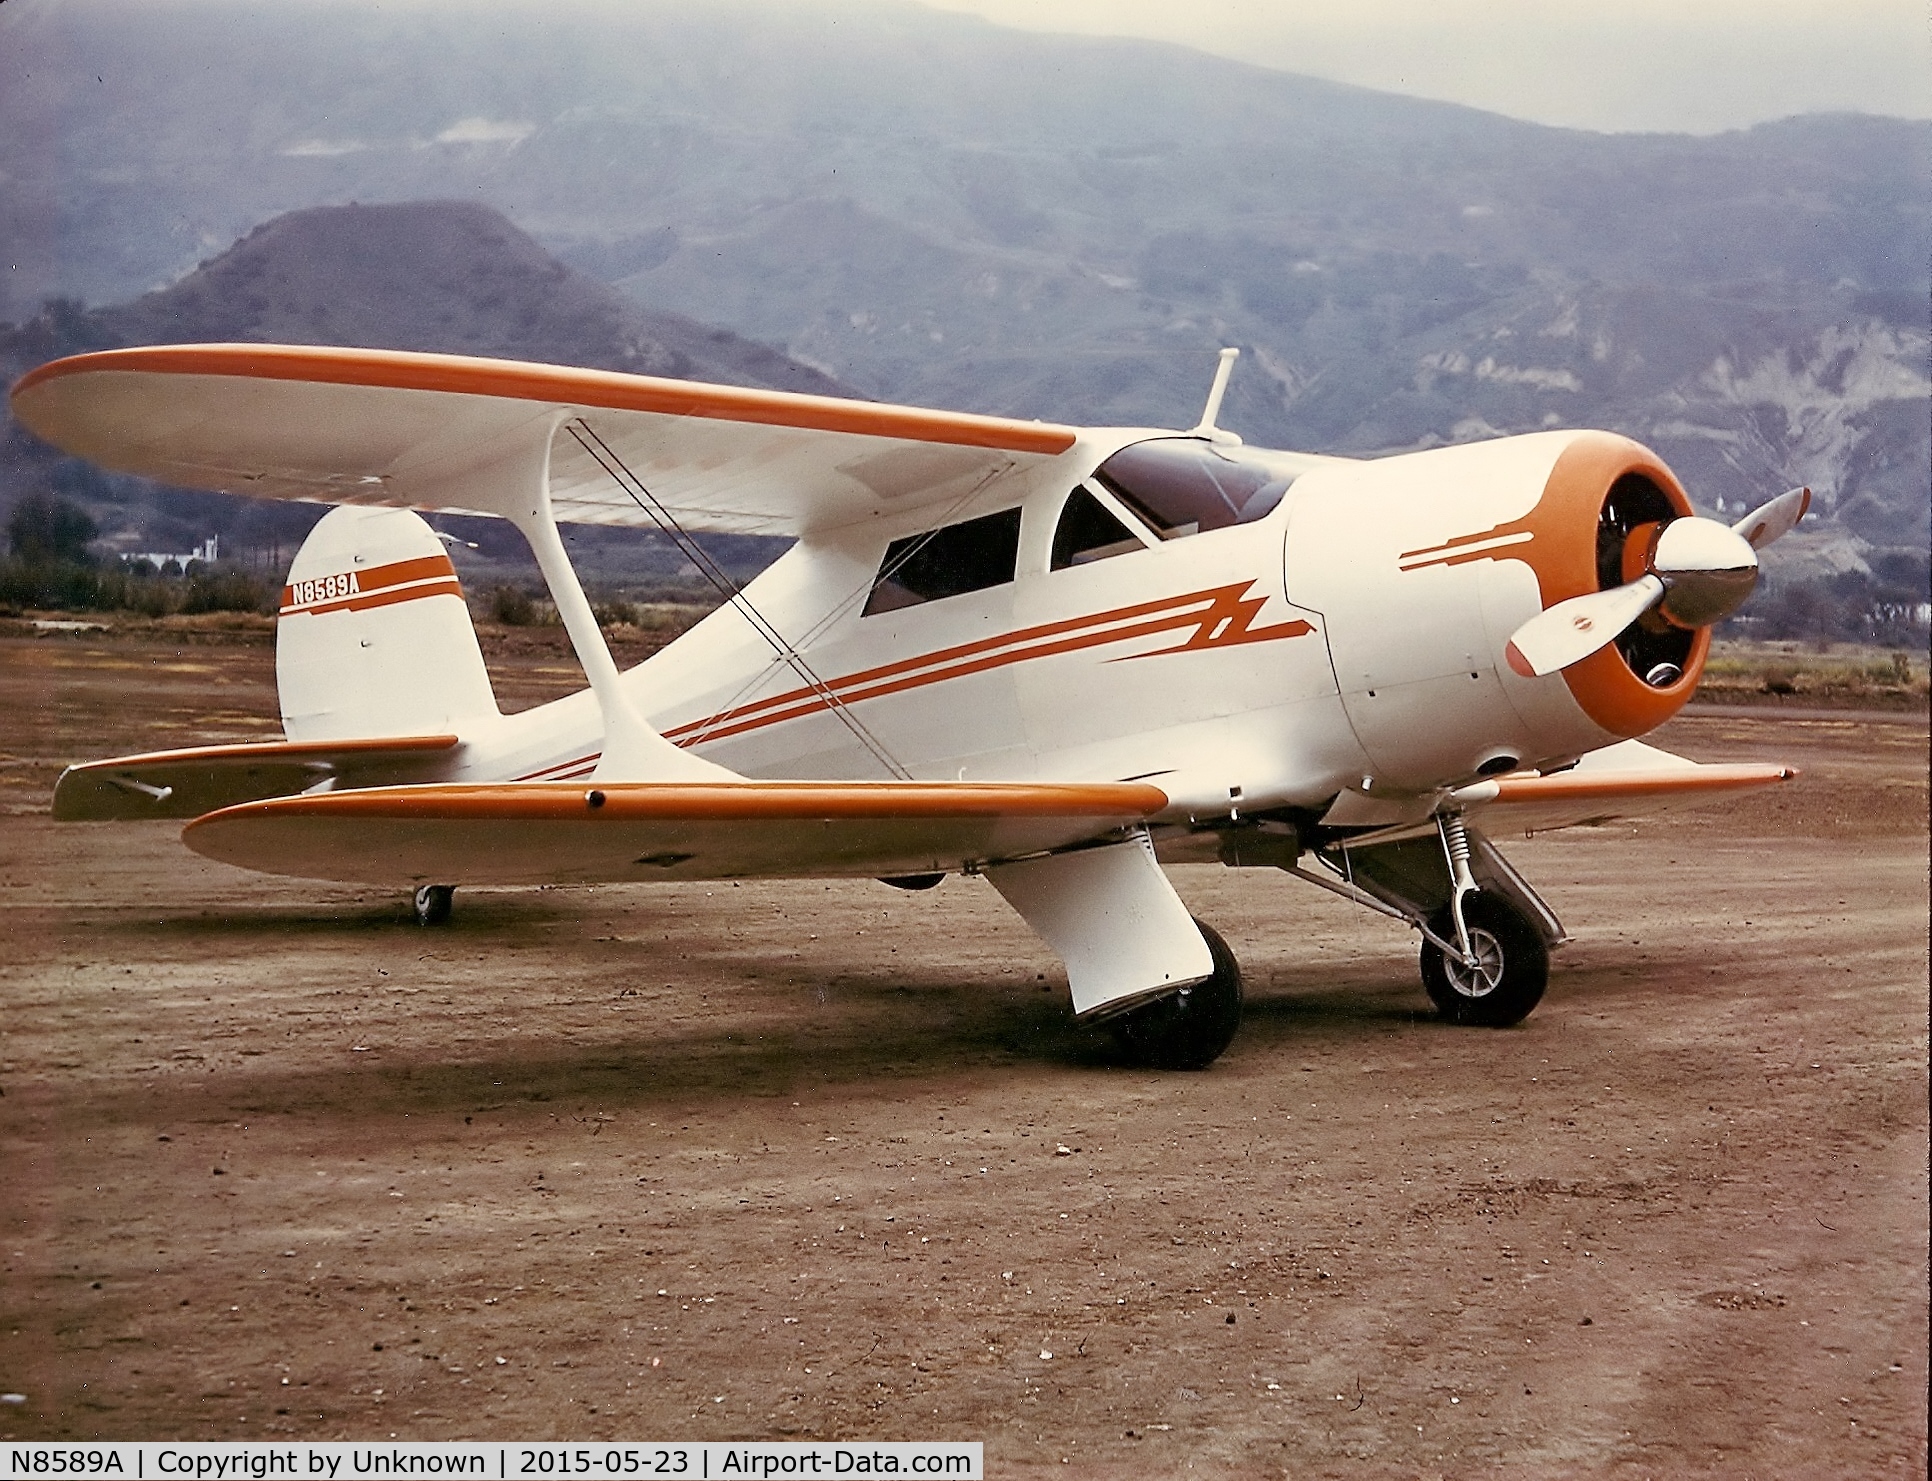 N8589A, 1949 Beech G17S C/N B-18, N8589A sometime in the late 1950's when she was owned by my father, Ken St.Oegger. I believe the photo was taken in Burbank, CA.